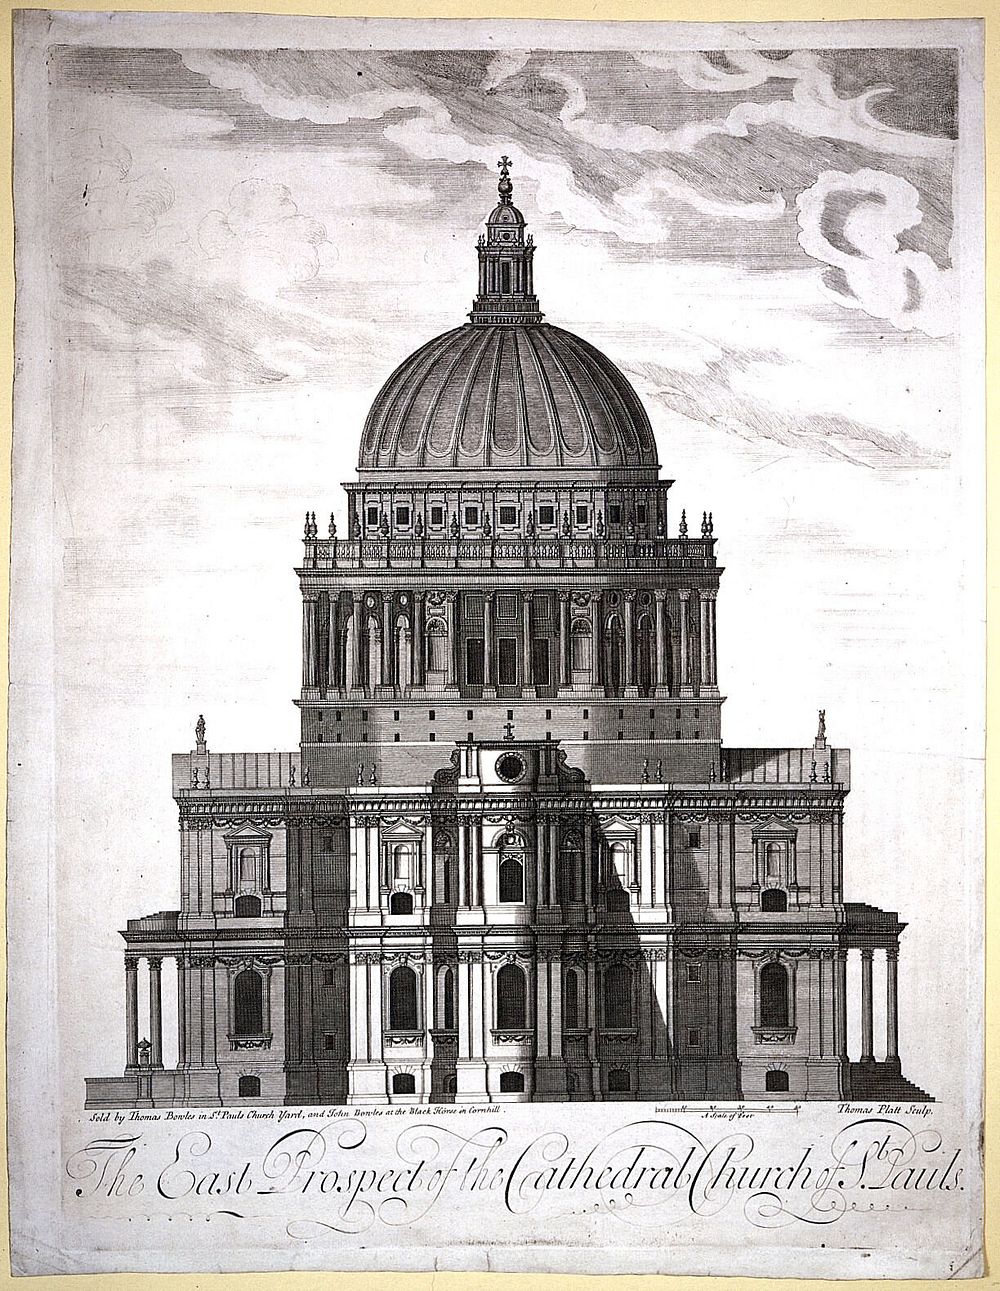 St Paul's cathedral, London: view from the east. Engraving by T. Platt. 17--.